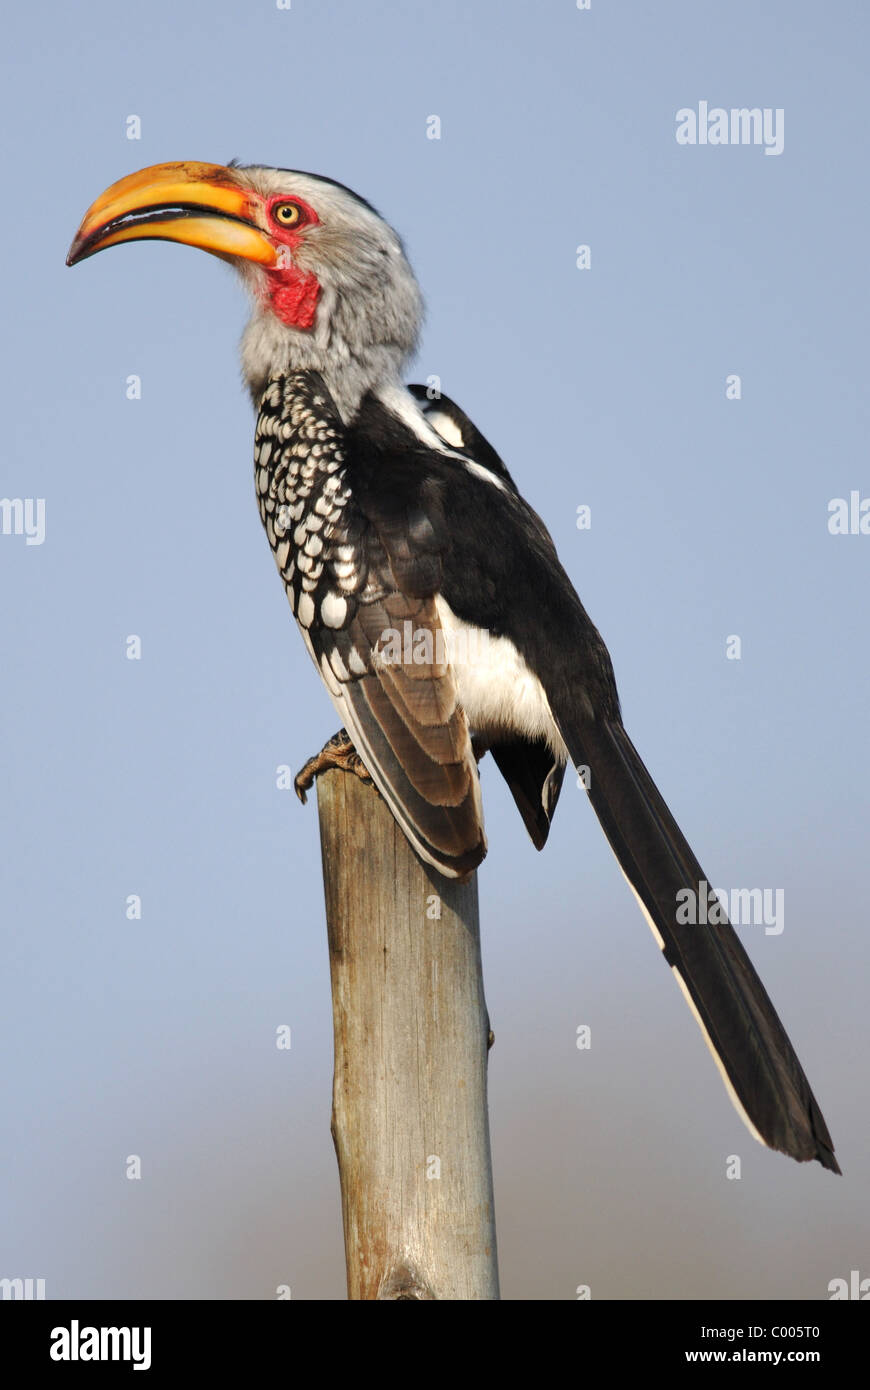 Southern Yellow-billed Hornbill (Tockus leucomelas) in Kruger National Park, South Africa. Stock Photo